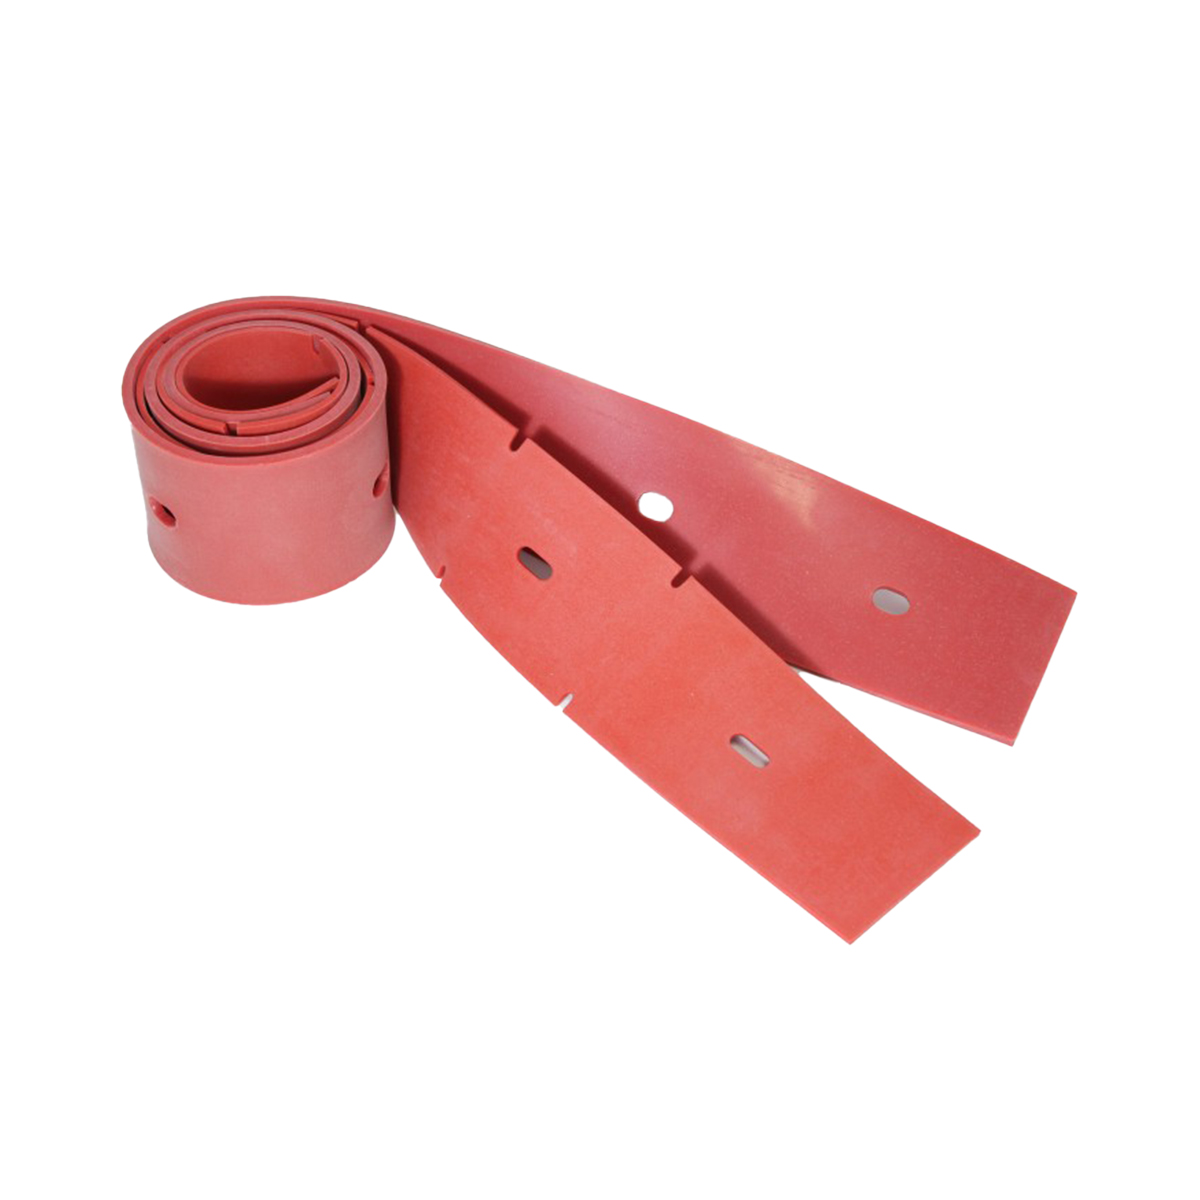 Advance SC401 Red Rubber Squeegee Kit (9100002543)